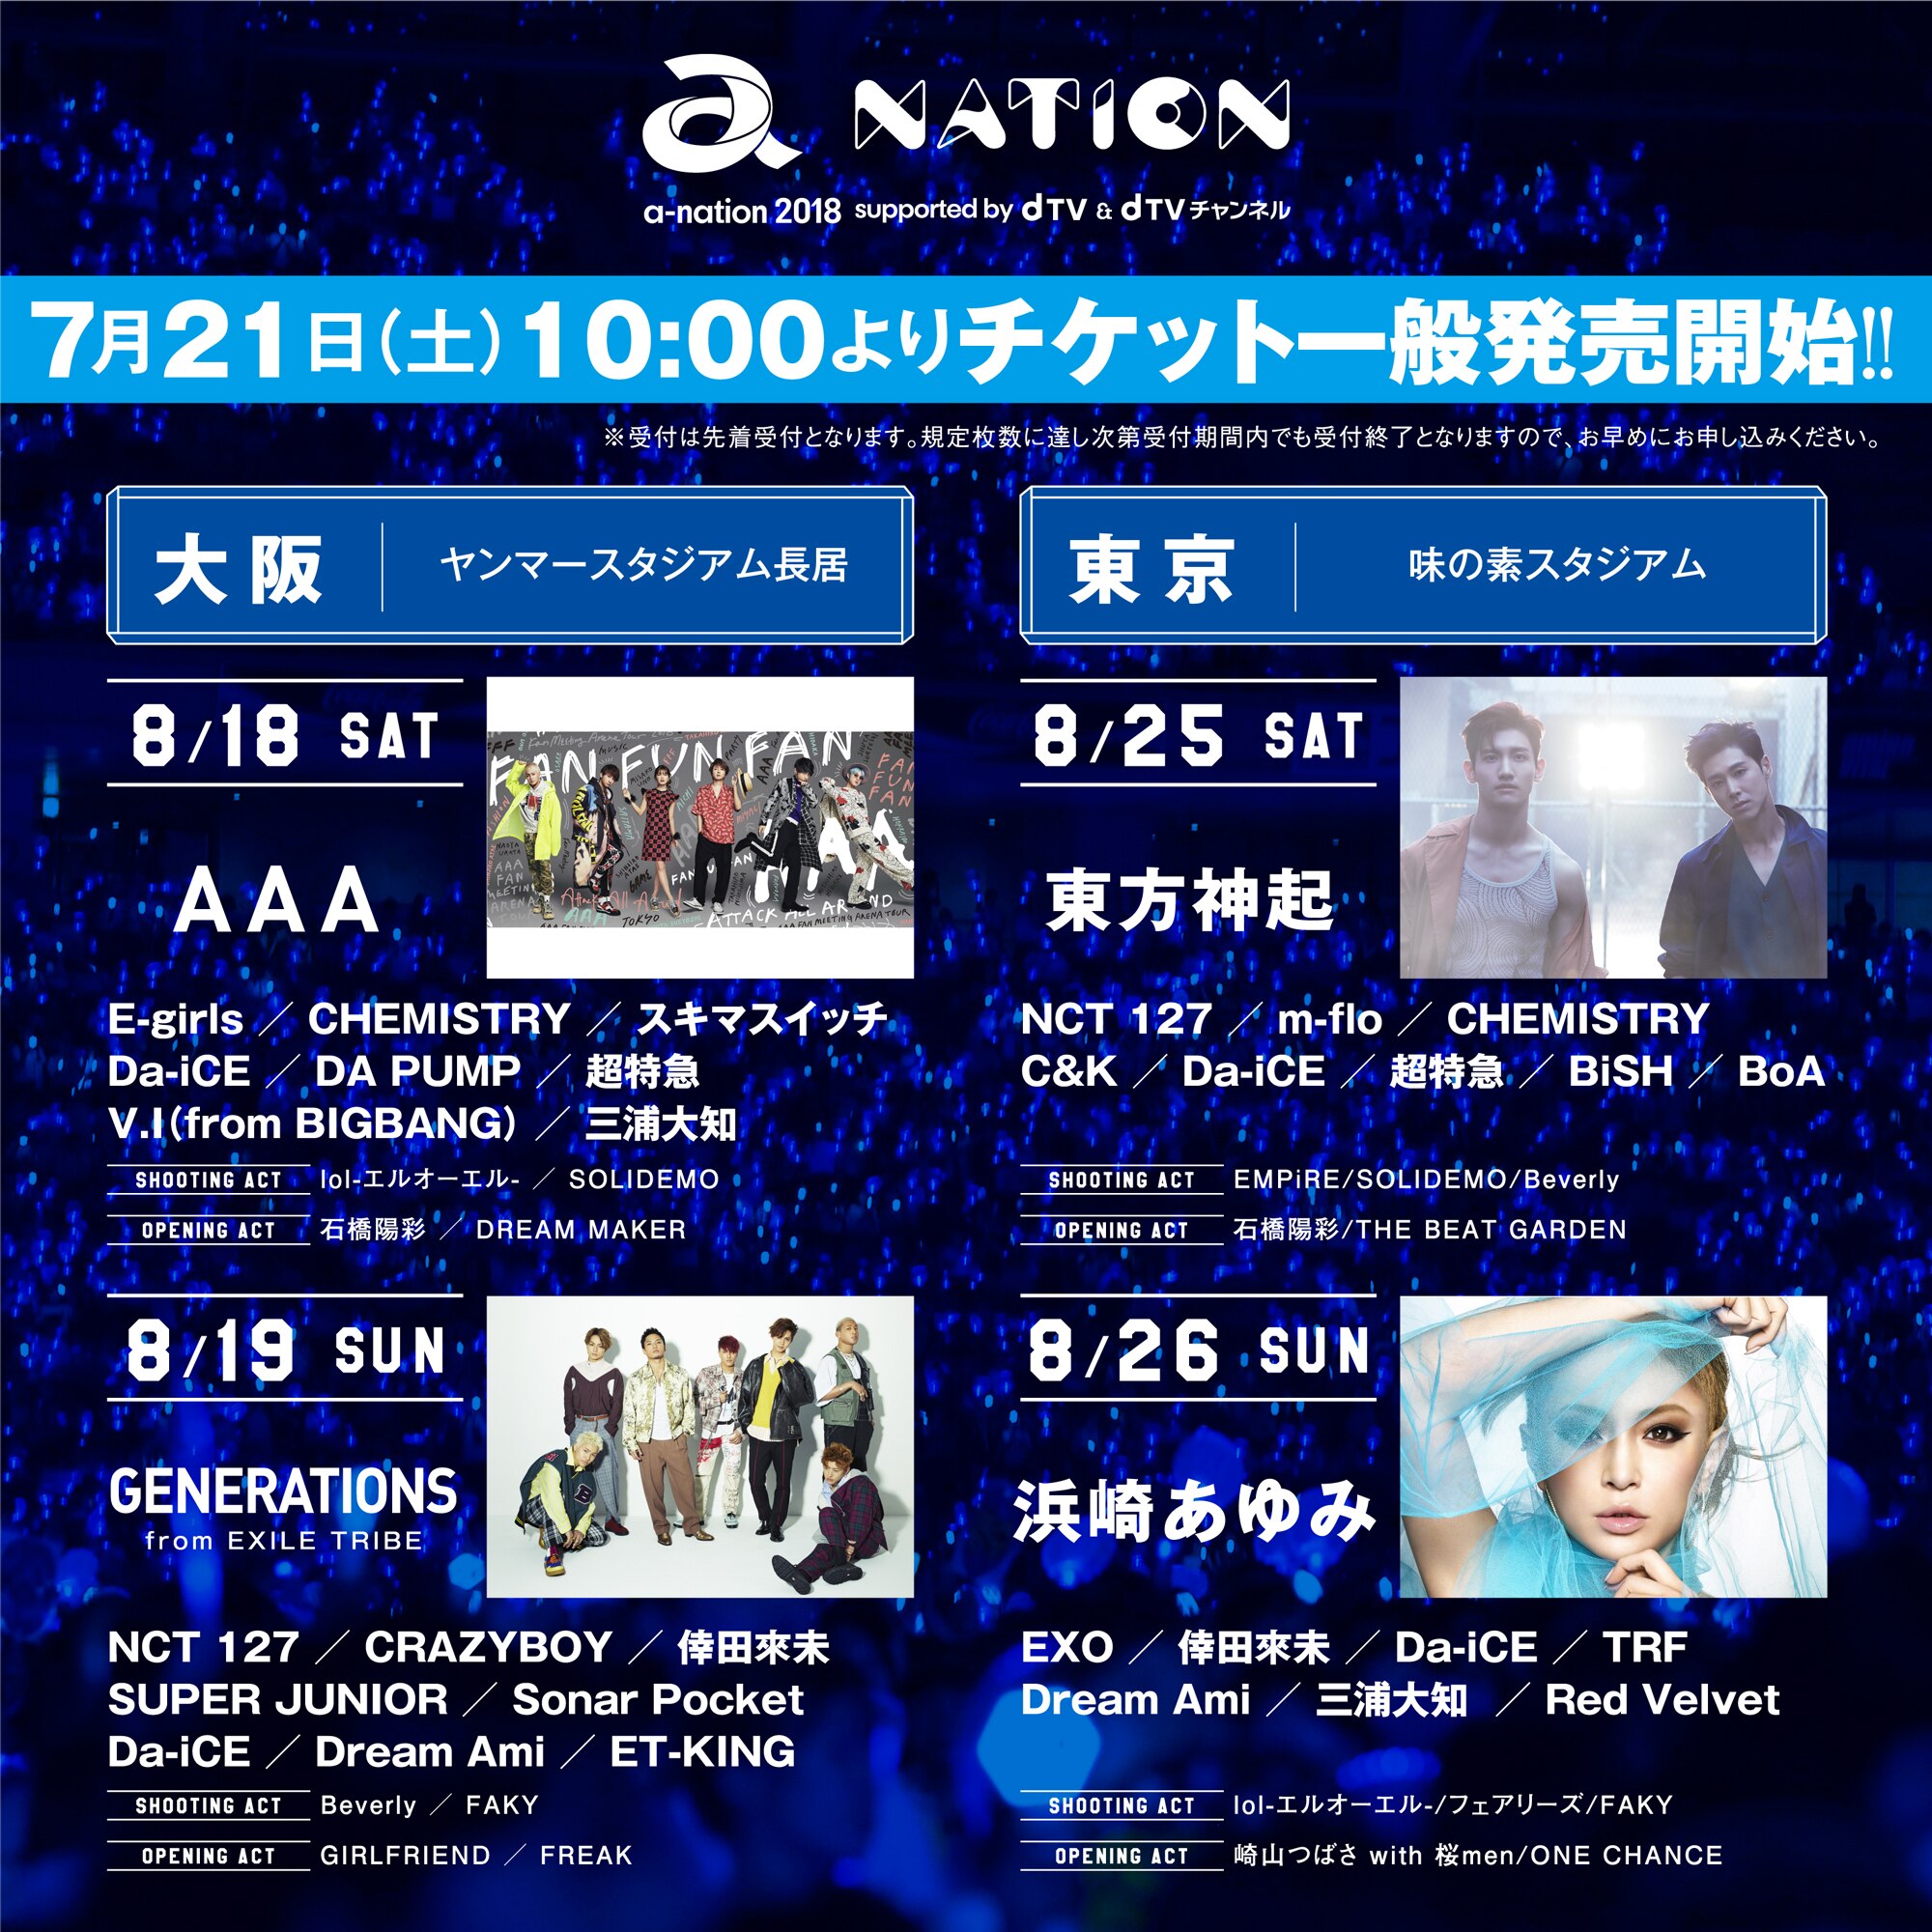 a-nation 2018 supported by dTV & dTVチャンネル】大阪、東京公演